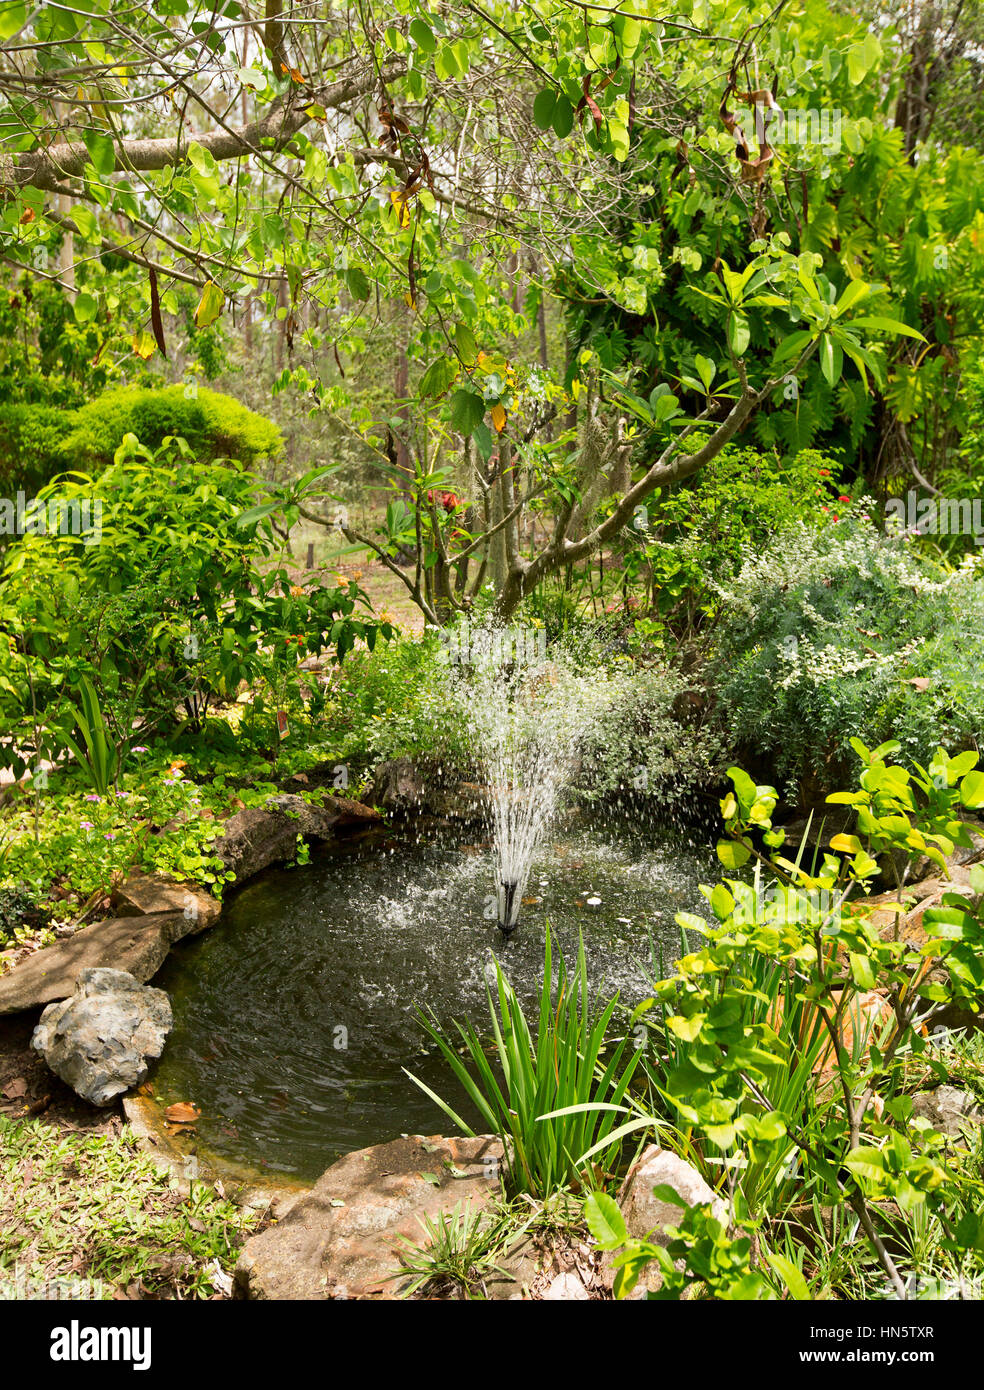 Garden water feature with large pond and central fountain surrounded by shading trees and lush green vegetation in Australia Stock Photo